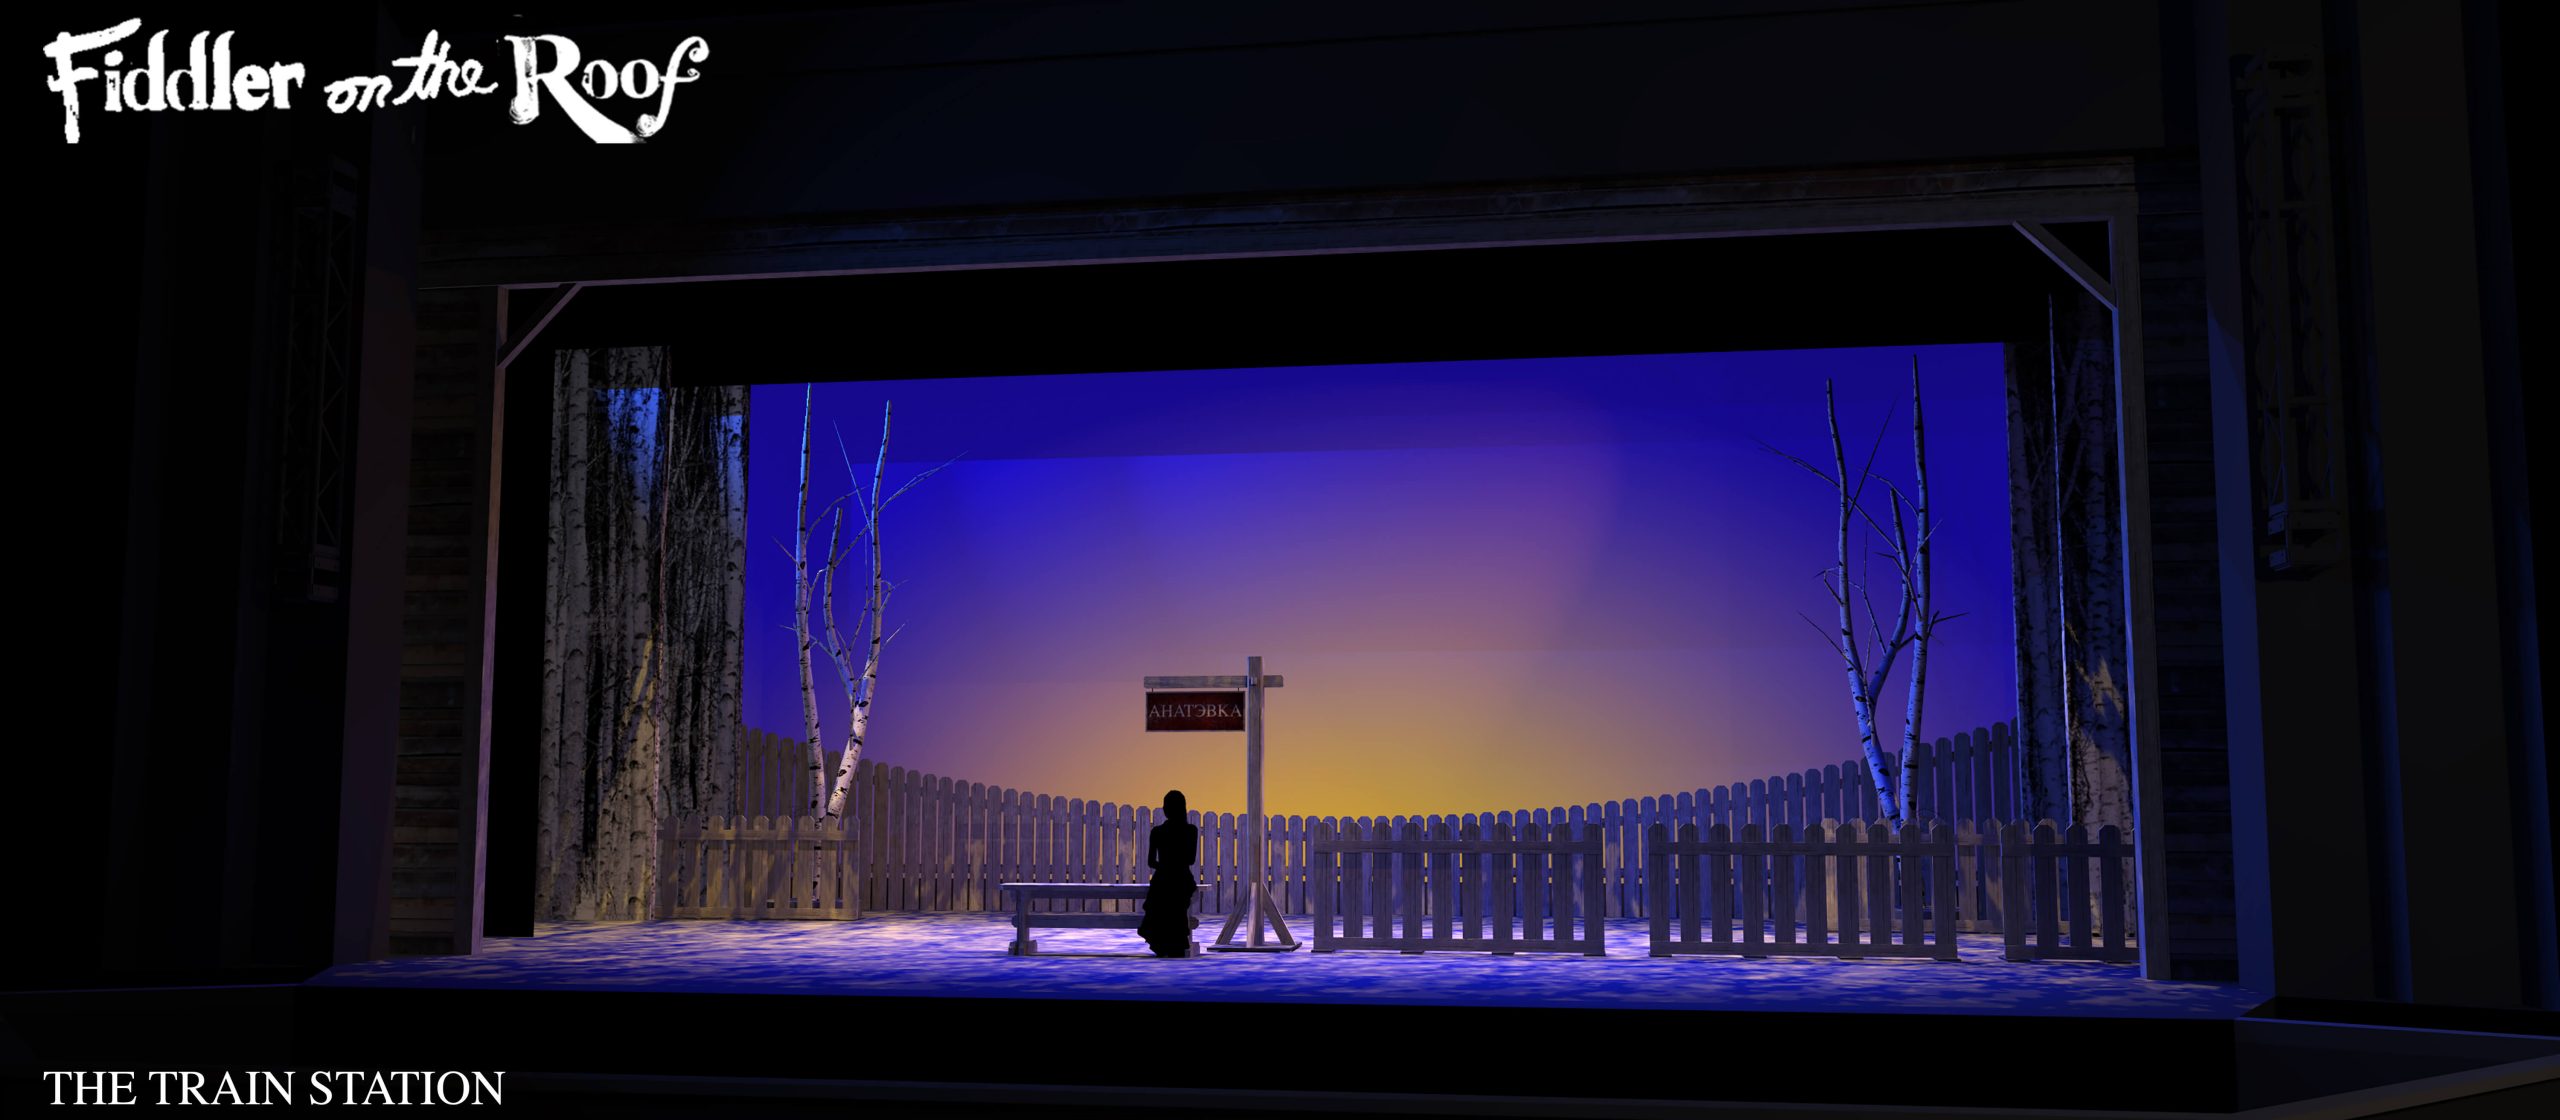 Fiddler on the Roof Musical - Train station - scenery rental - Front Row Theatrical